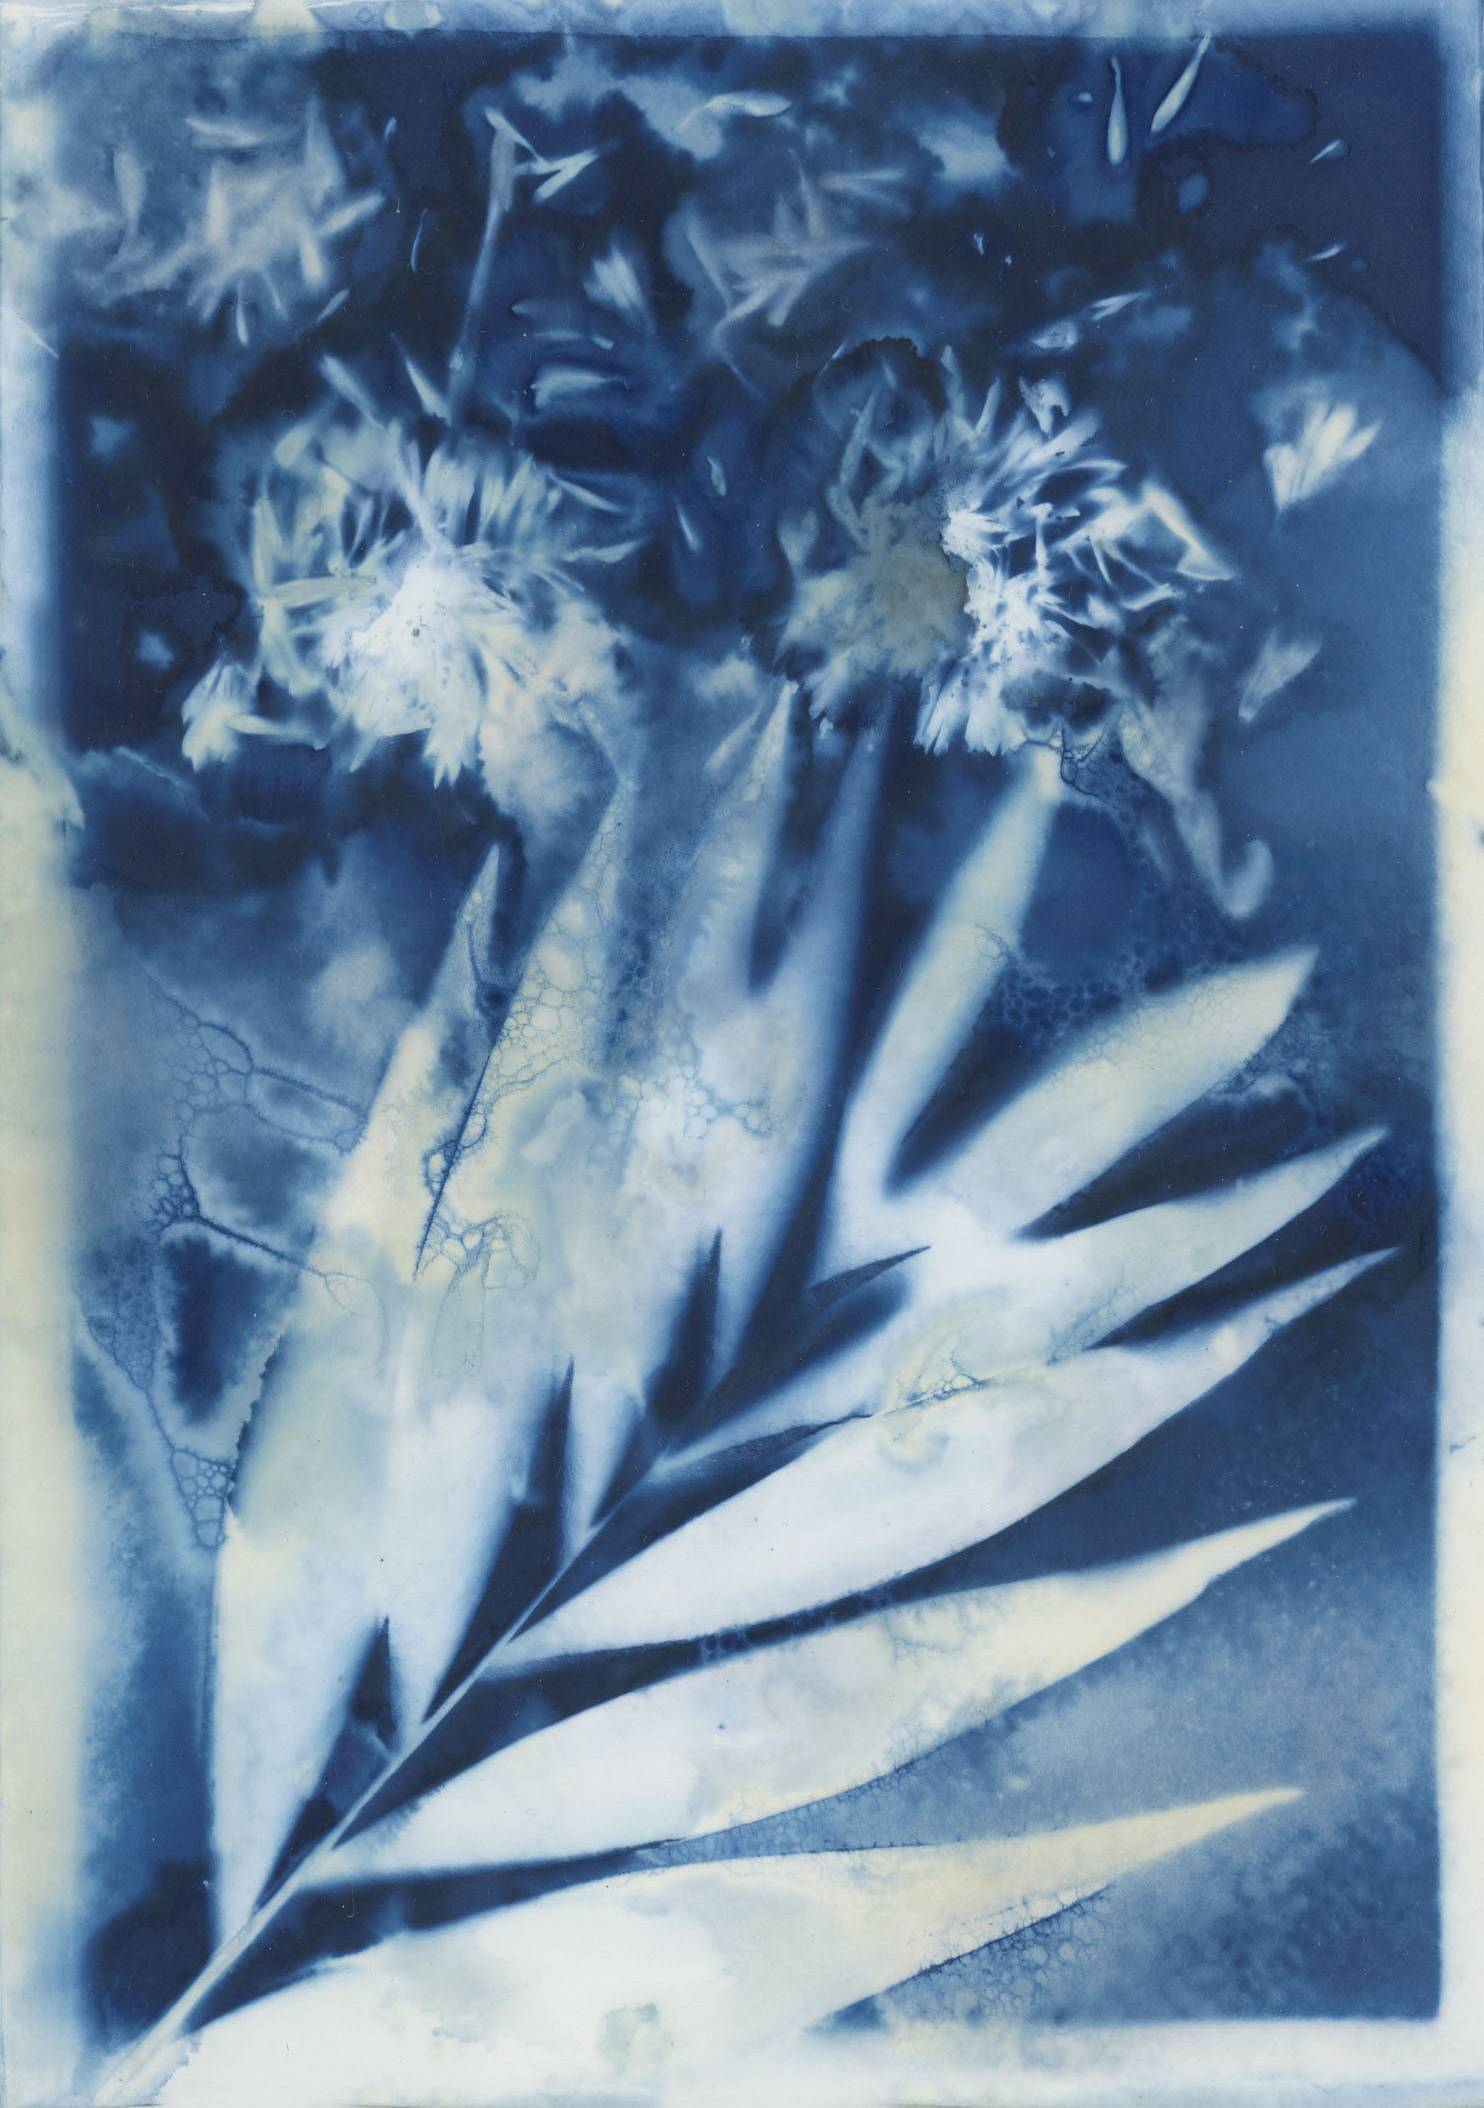 An Introduction to Photography Techniques: Cyanotype